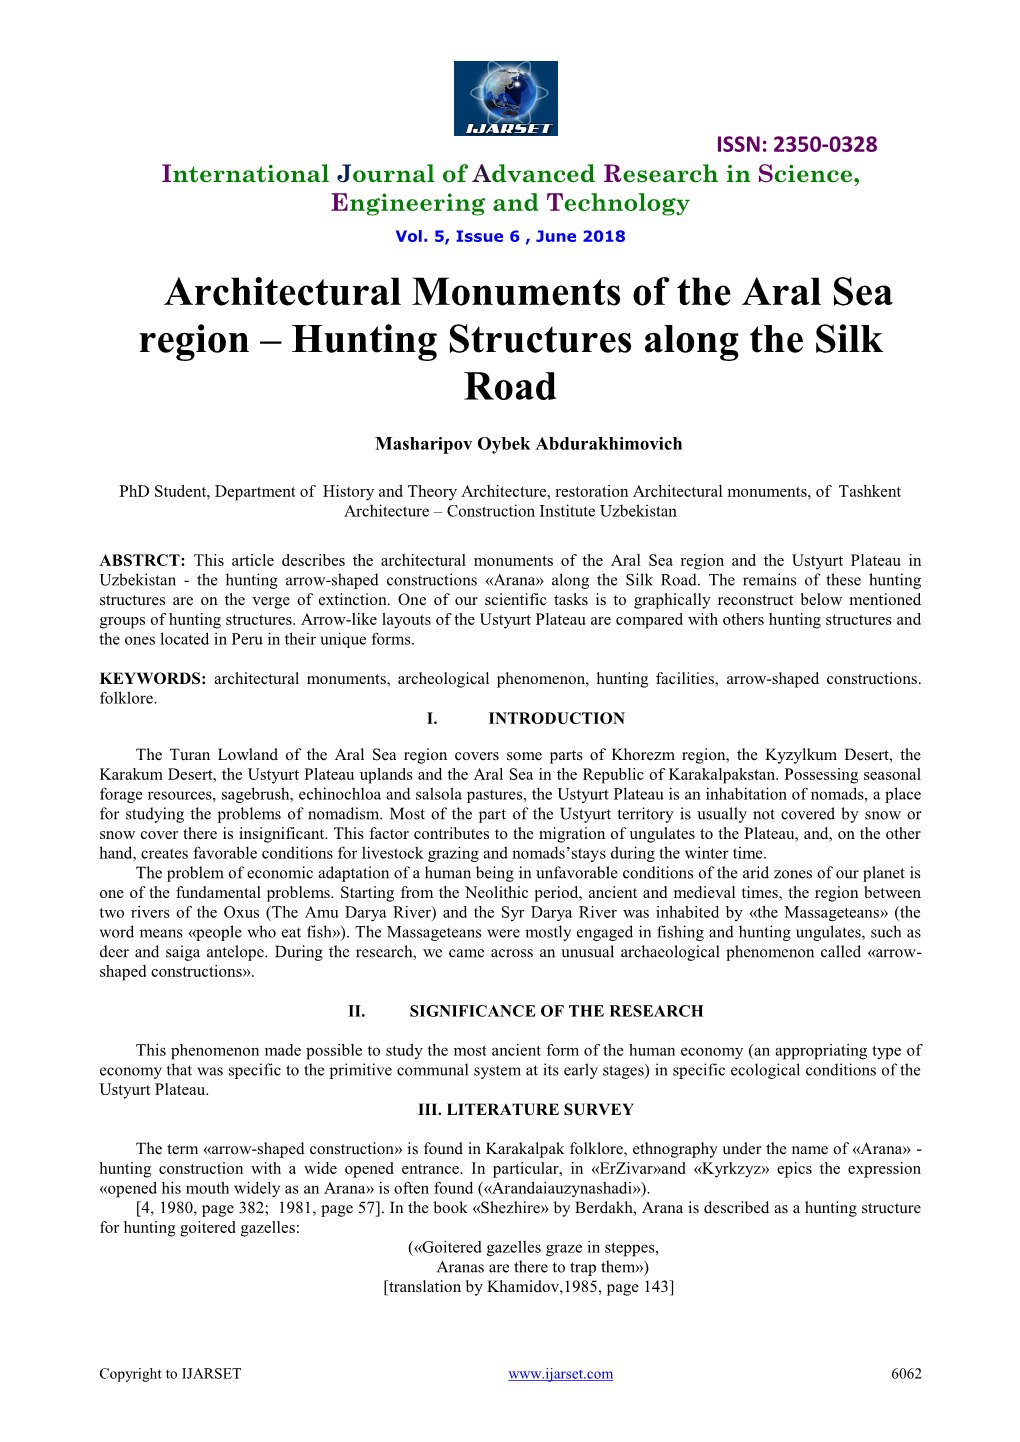 Architectural Monuments of the Aral Sea Region – Hunting Structures Along the Silk Road